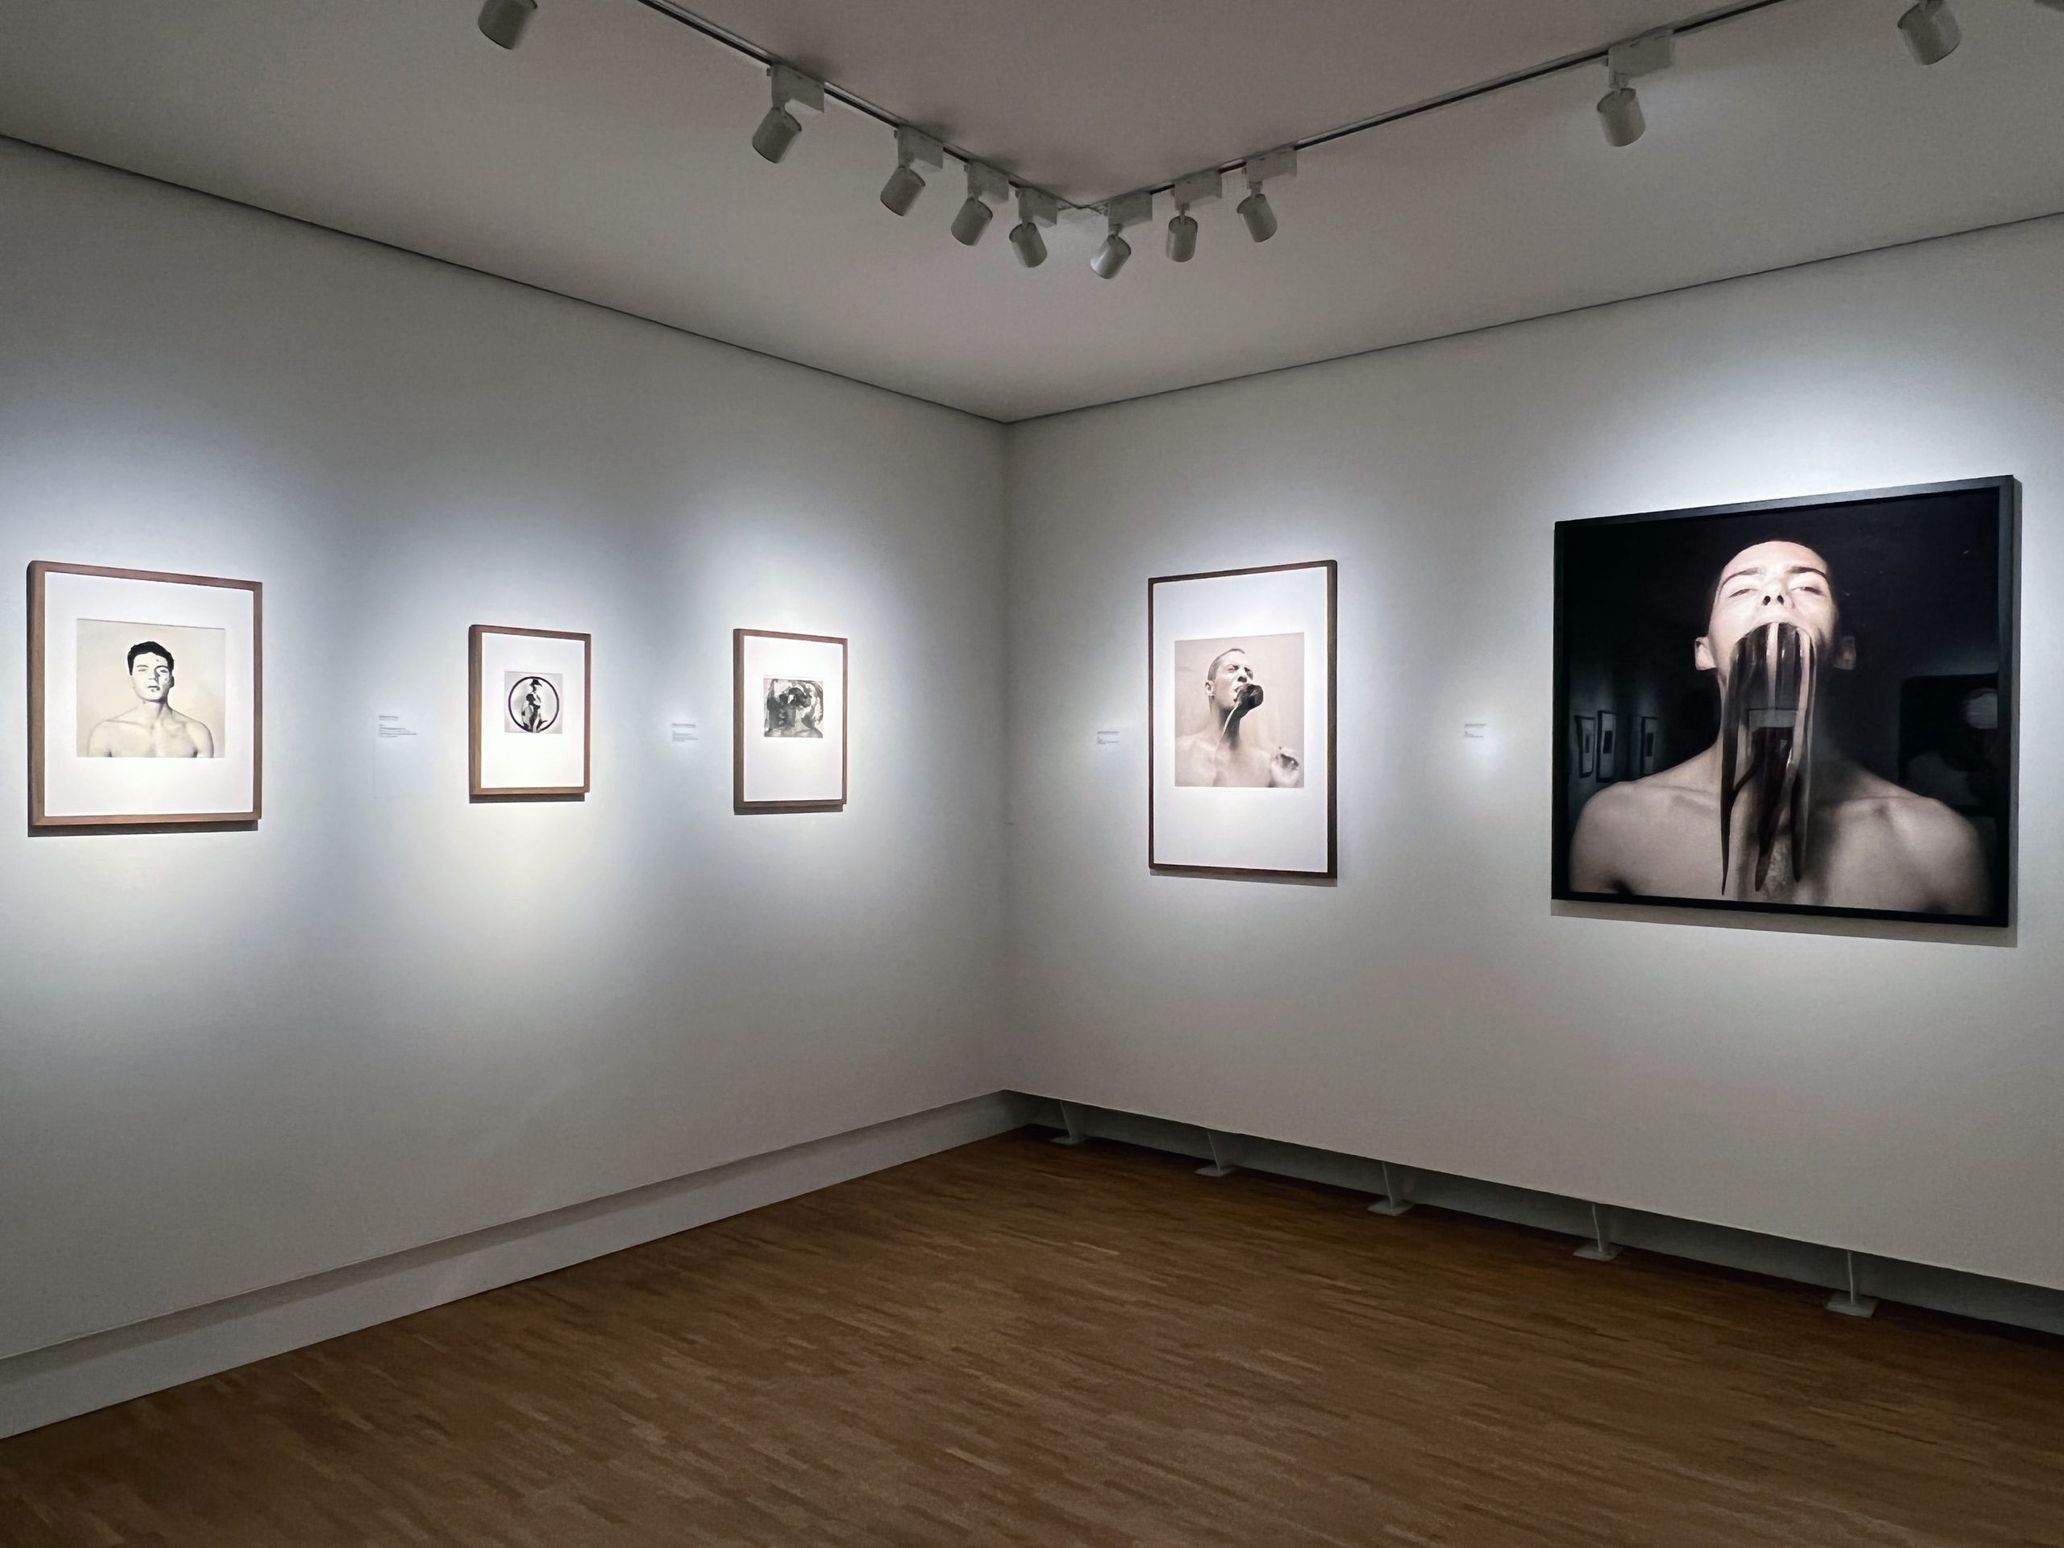 Over 50 of Blanca’s photographs were collected for this exhibition from various sources, but they were biased towards part of his career and did not provide a complete overview of his lifetime work. This may have something to do with the fact that museums and collectors have lost interest in his work since a certain incident in 1994.